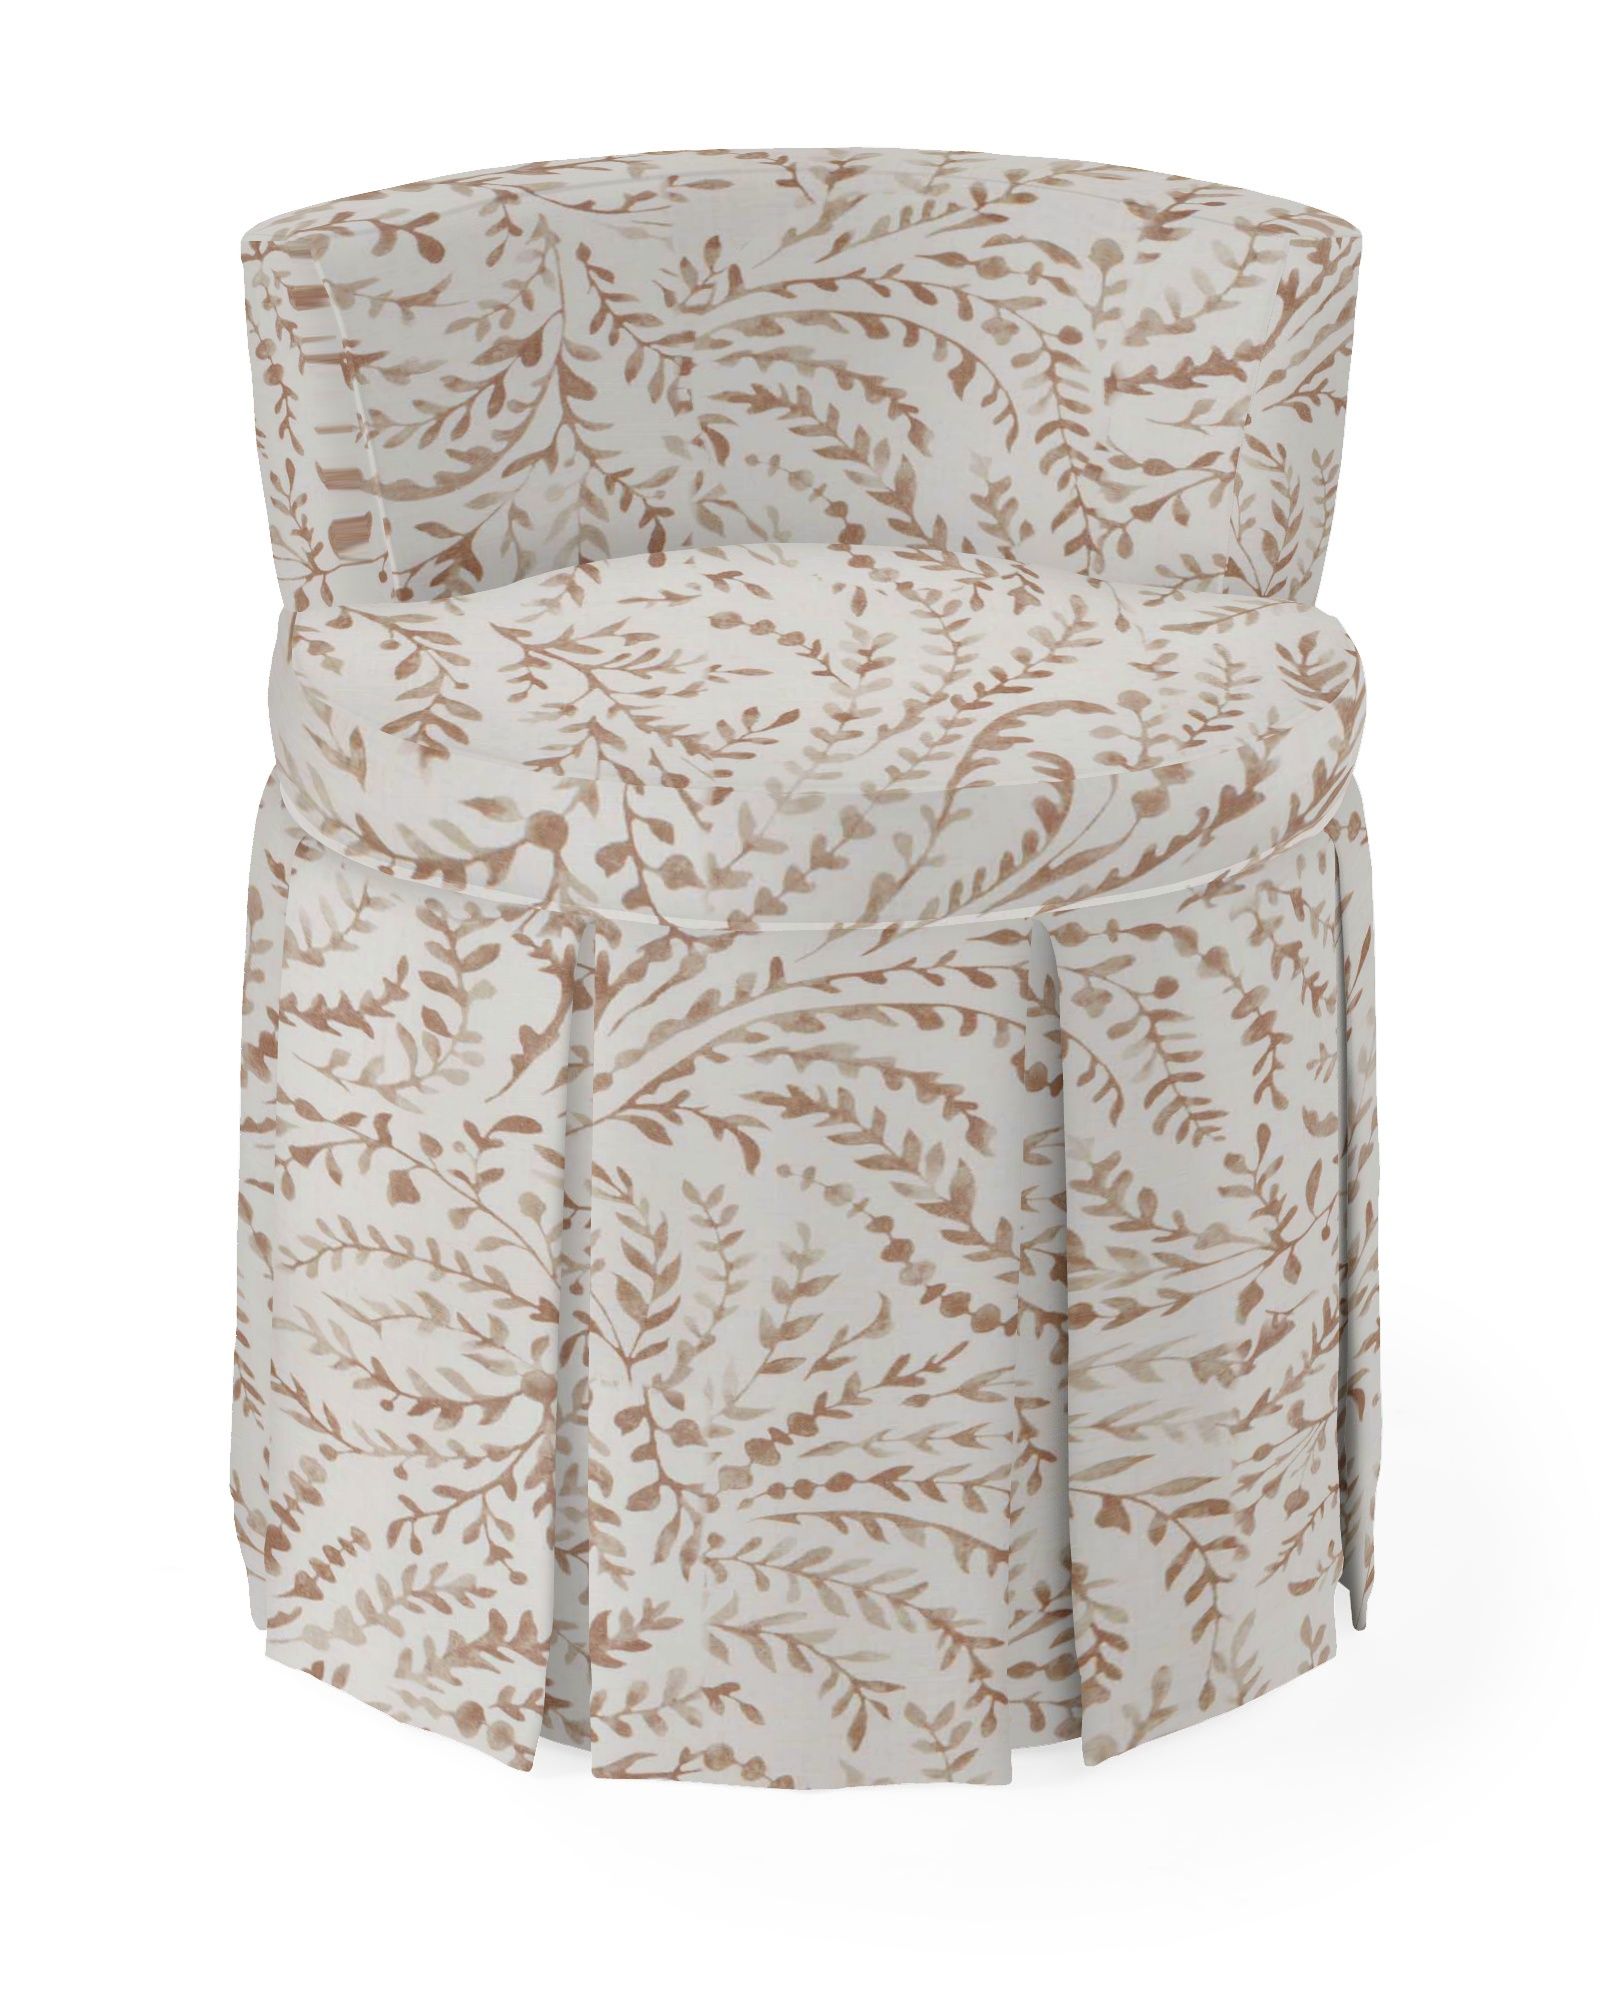 Harrison Vanity Chair | Serena and Lily